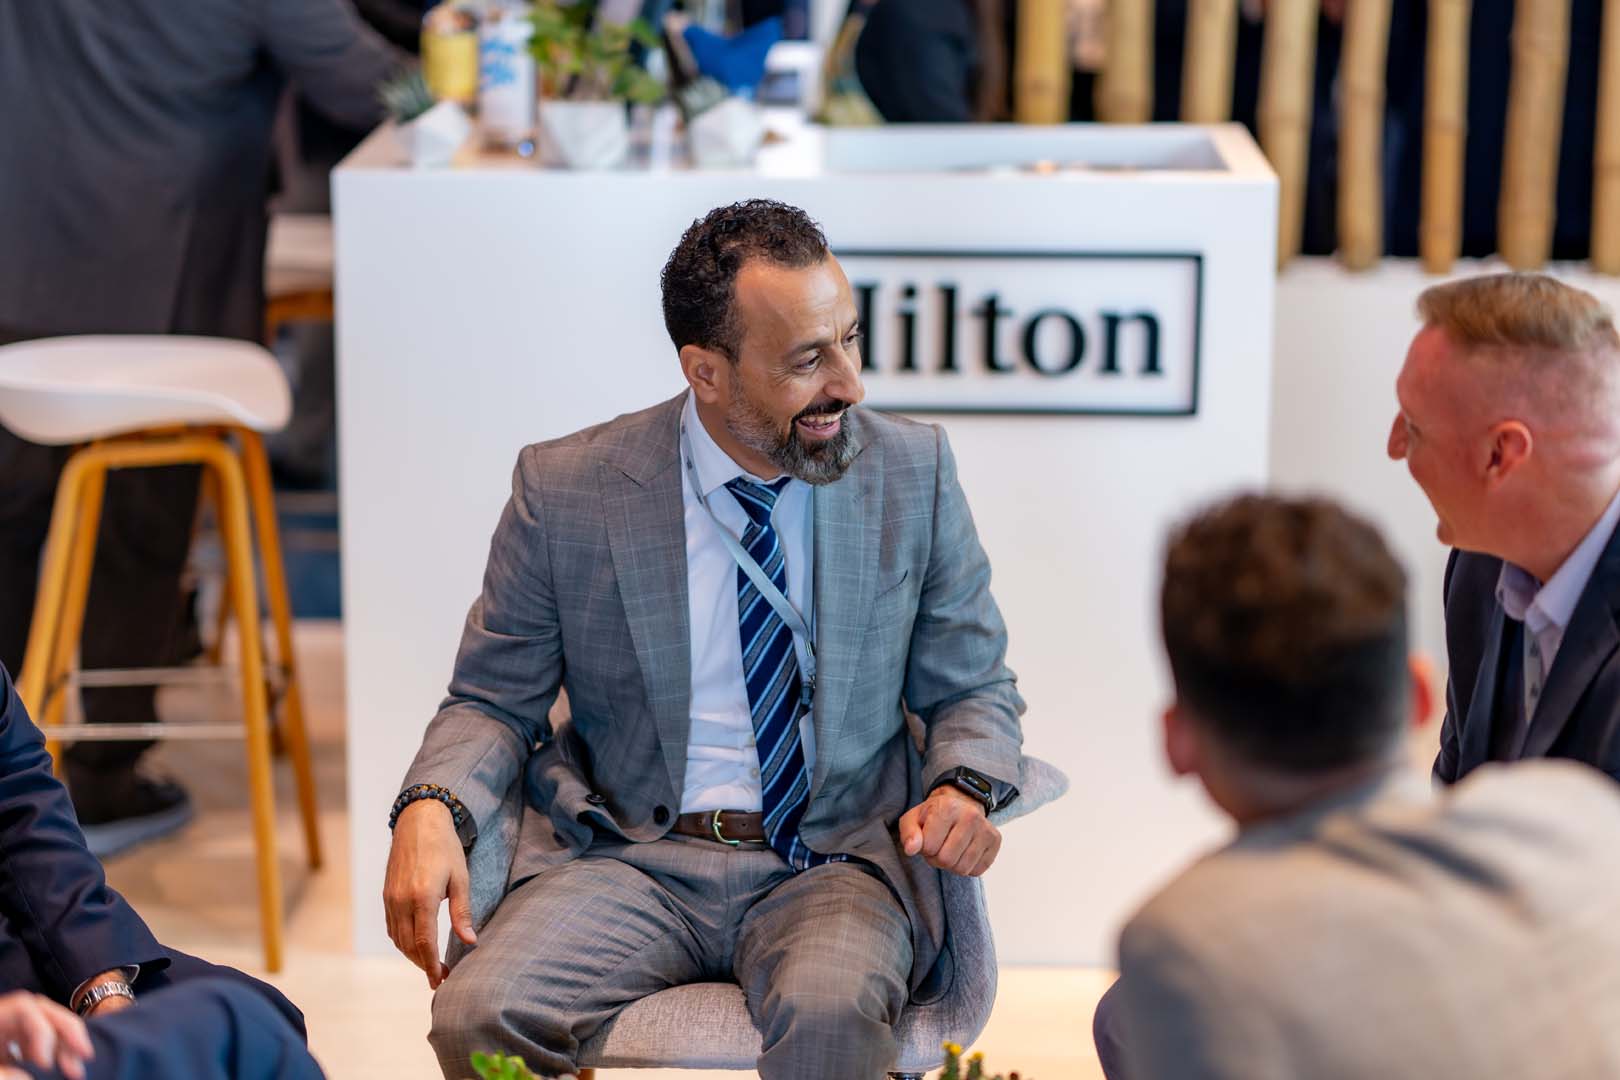 Snapshots from the recent attendance at the Future Hospitality Summit event hosted at the Hilton Abu Dhabi Yas Island2